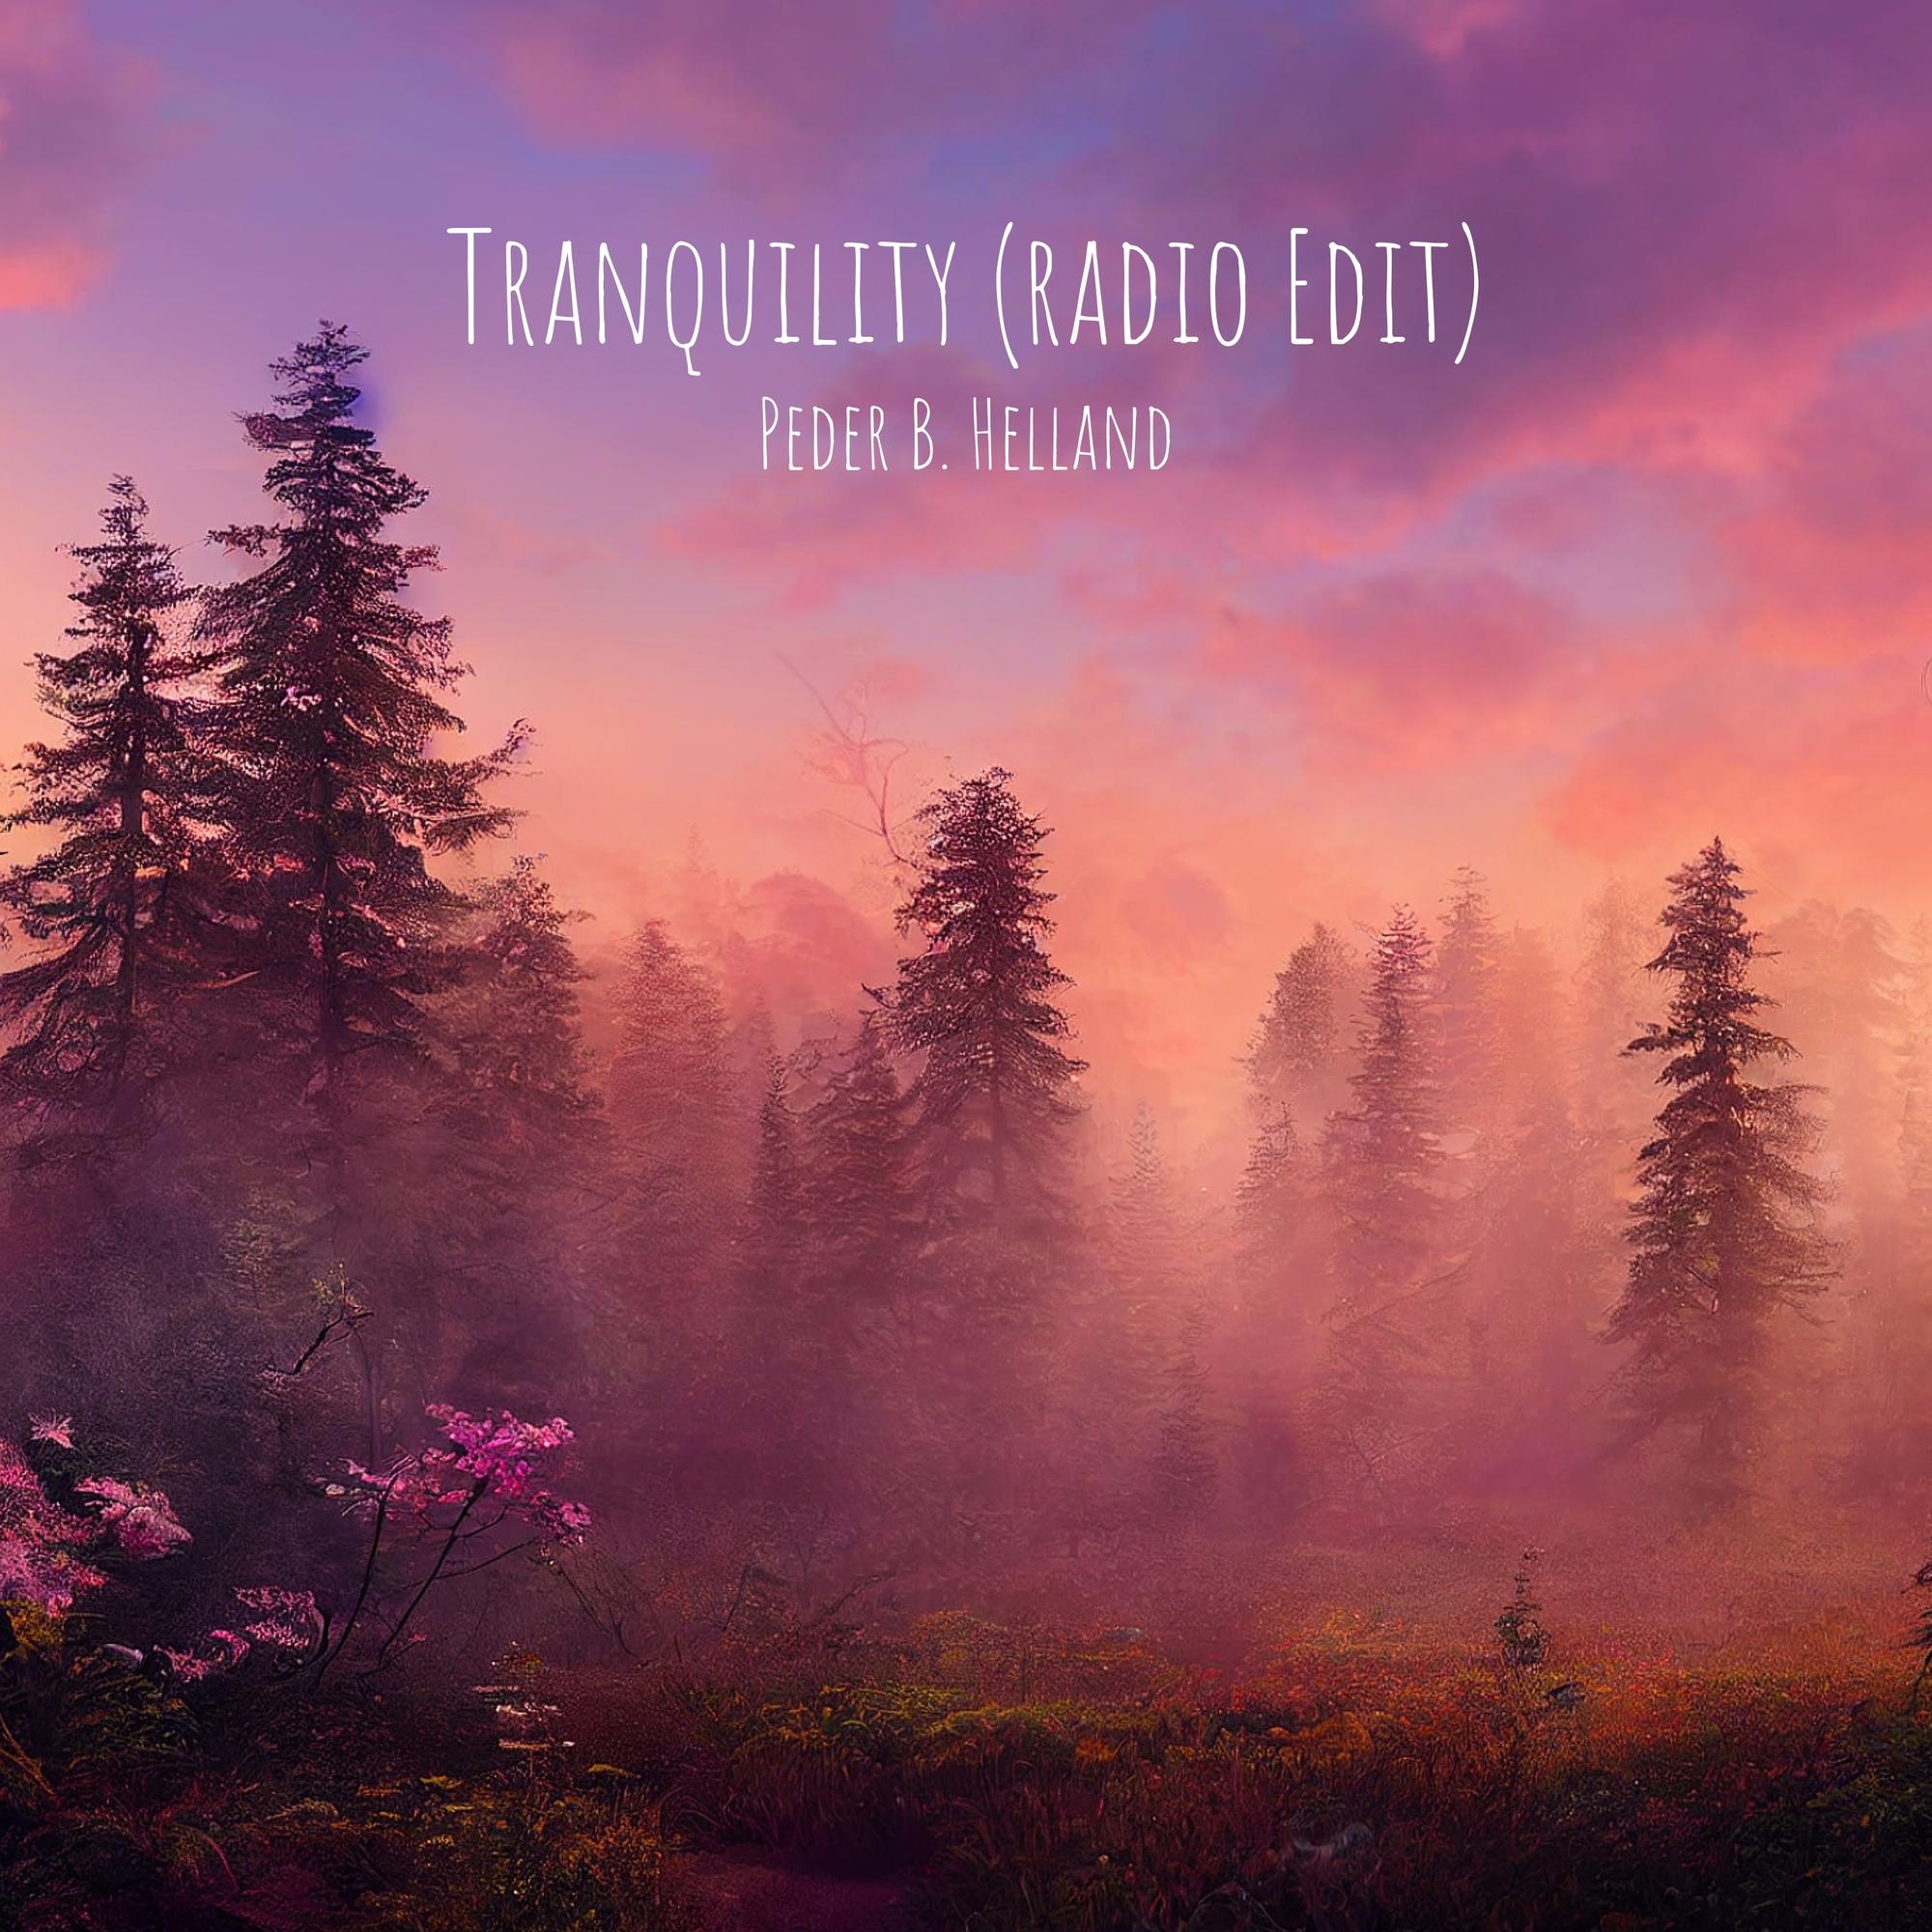 Cover art for the single Tranquility (Radio Edit) by Peder B. Helland